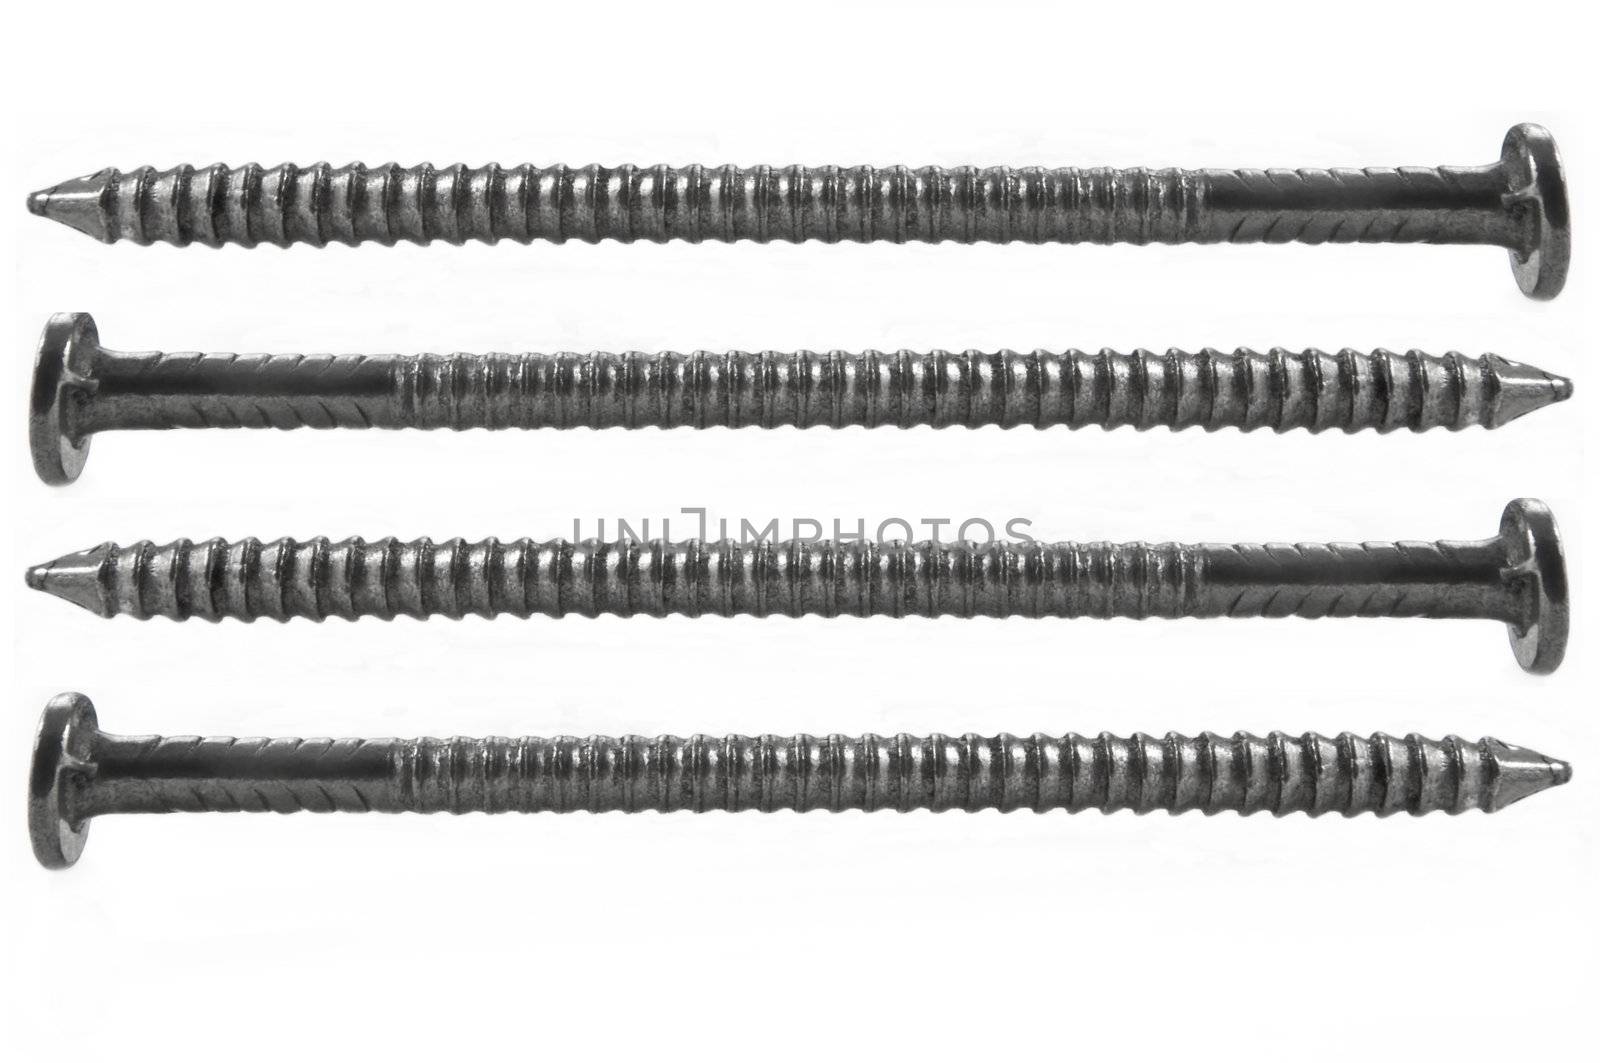 Four steel nails arranged horizontally and over white